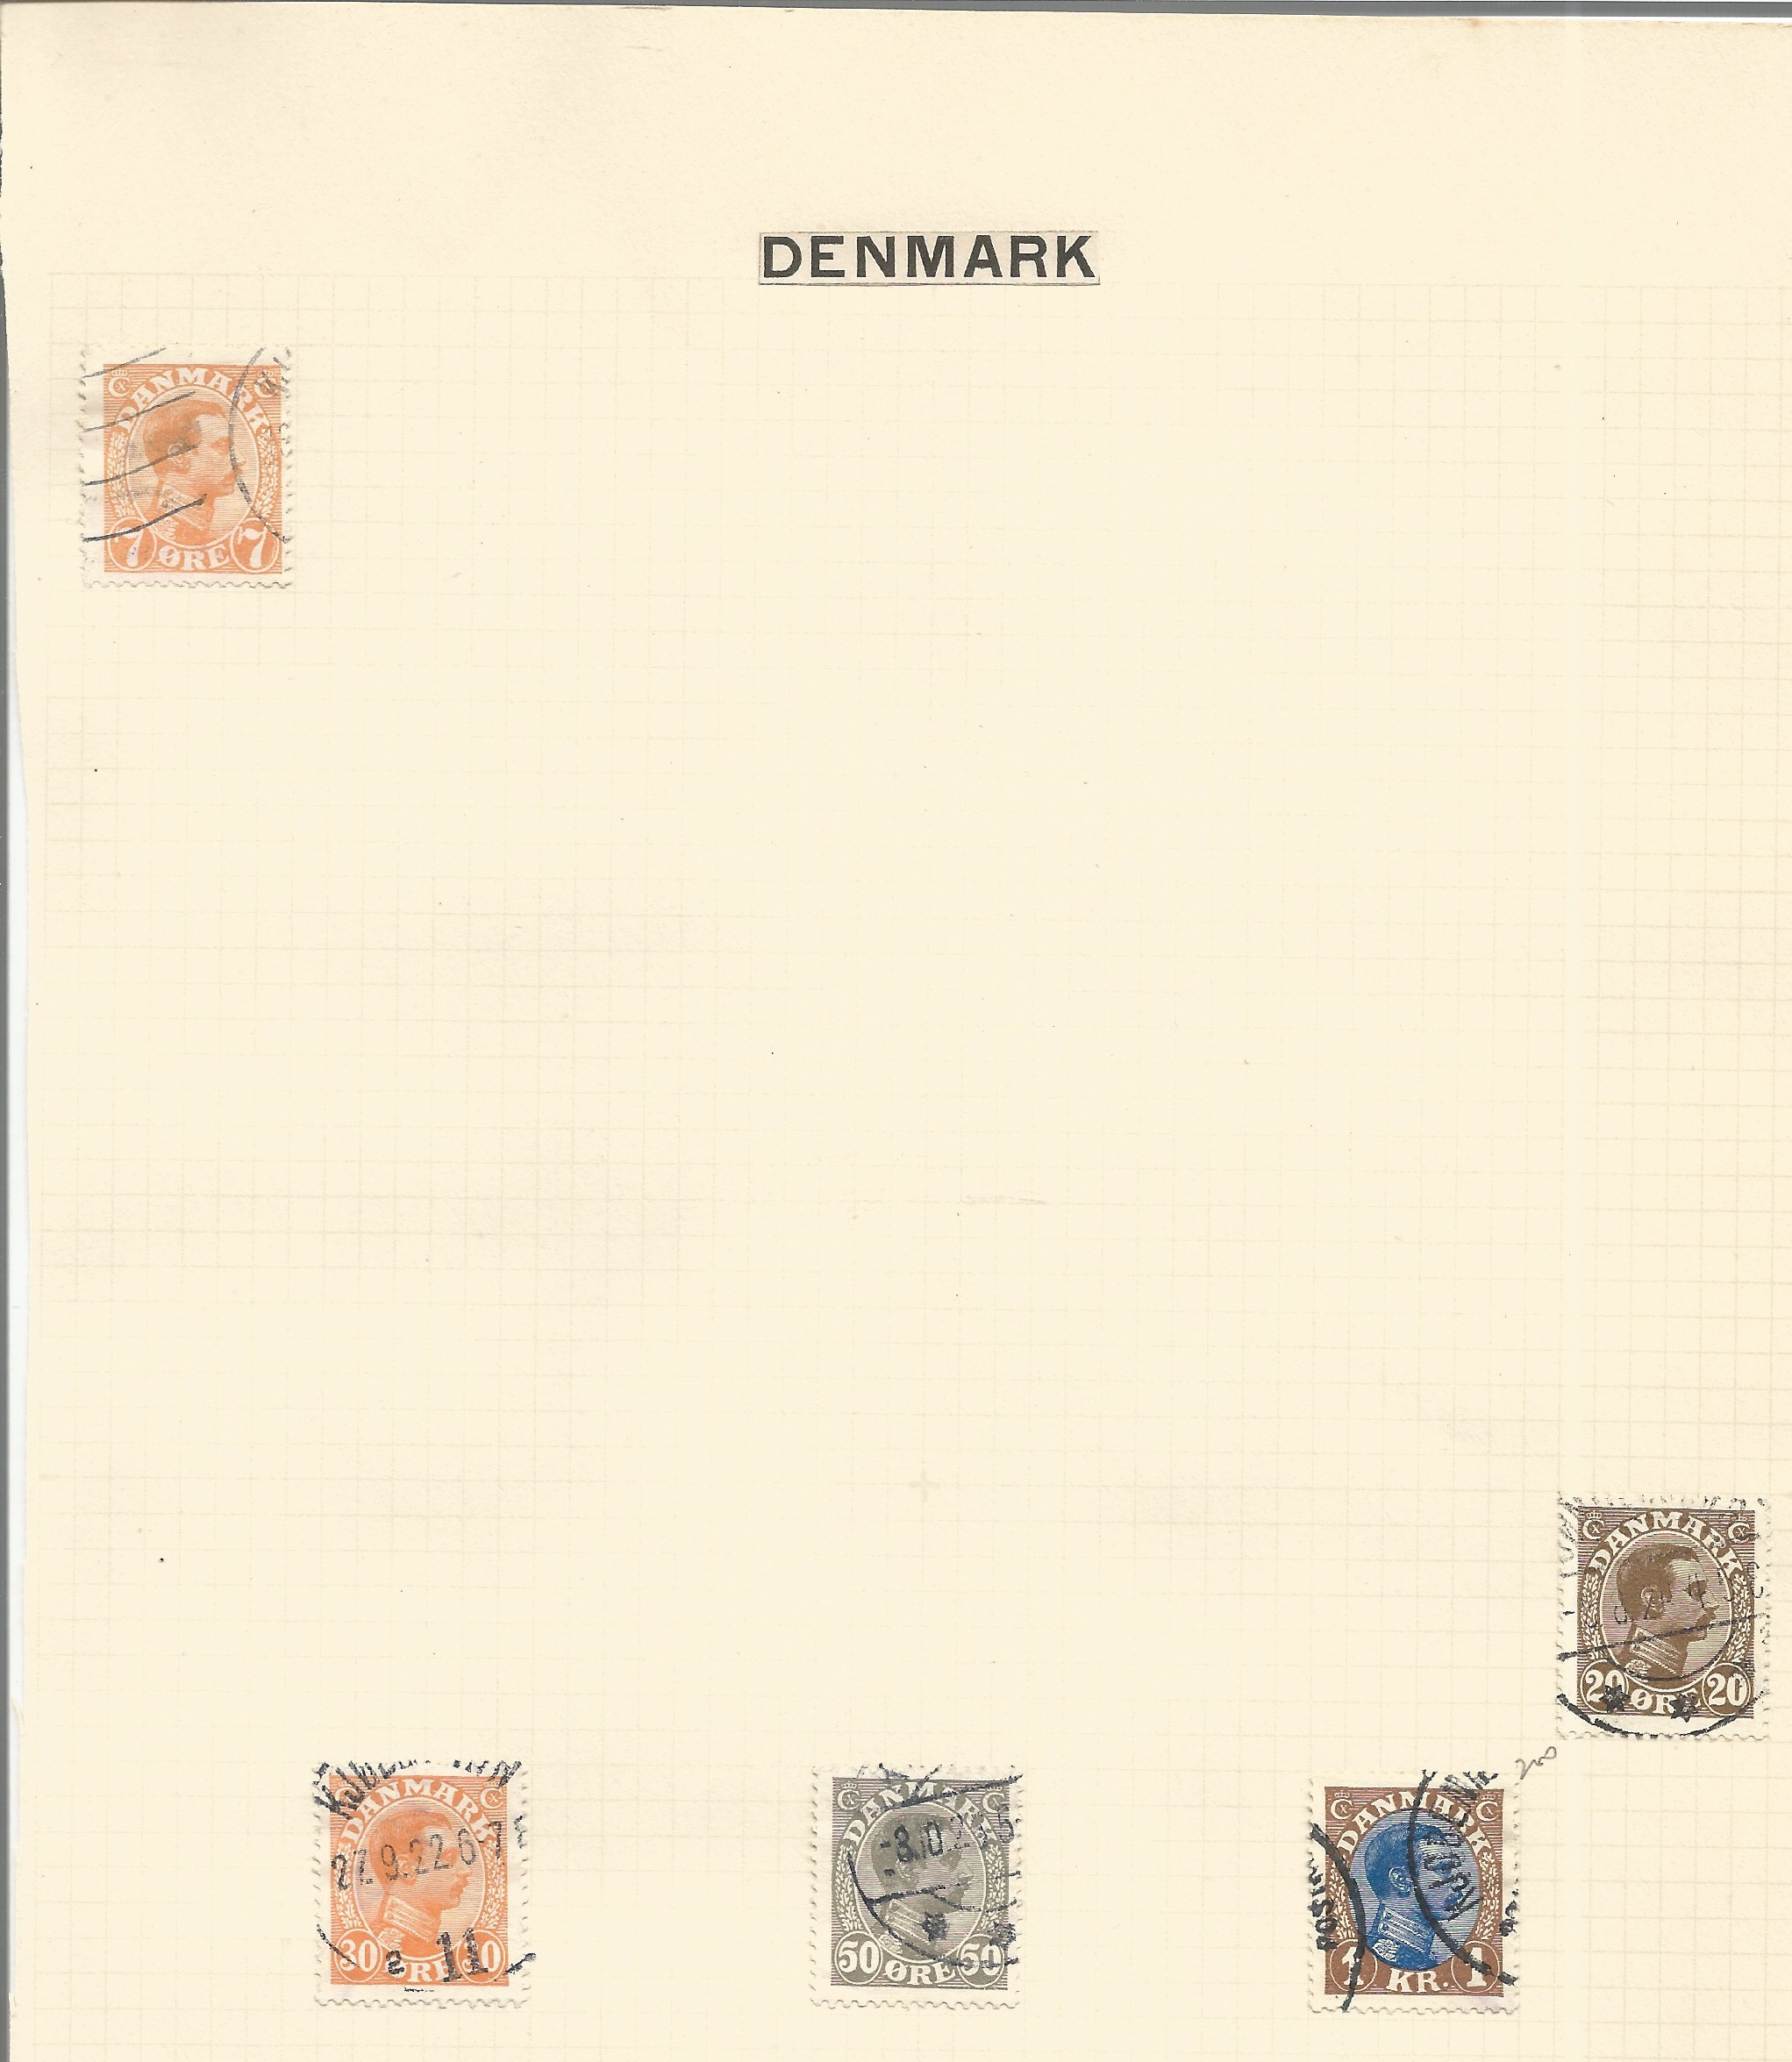 Danish stamp collection on album pages. Good condition. We combine postage on multiple winning